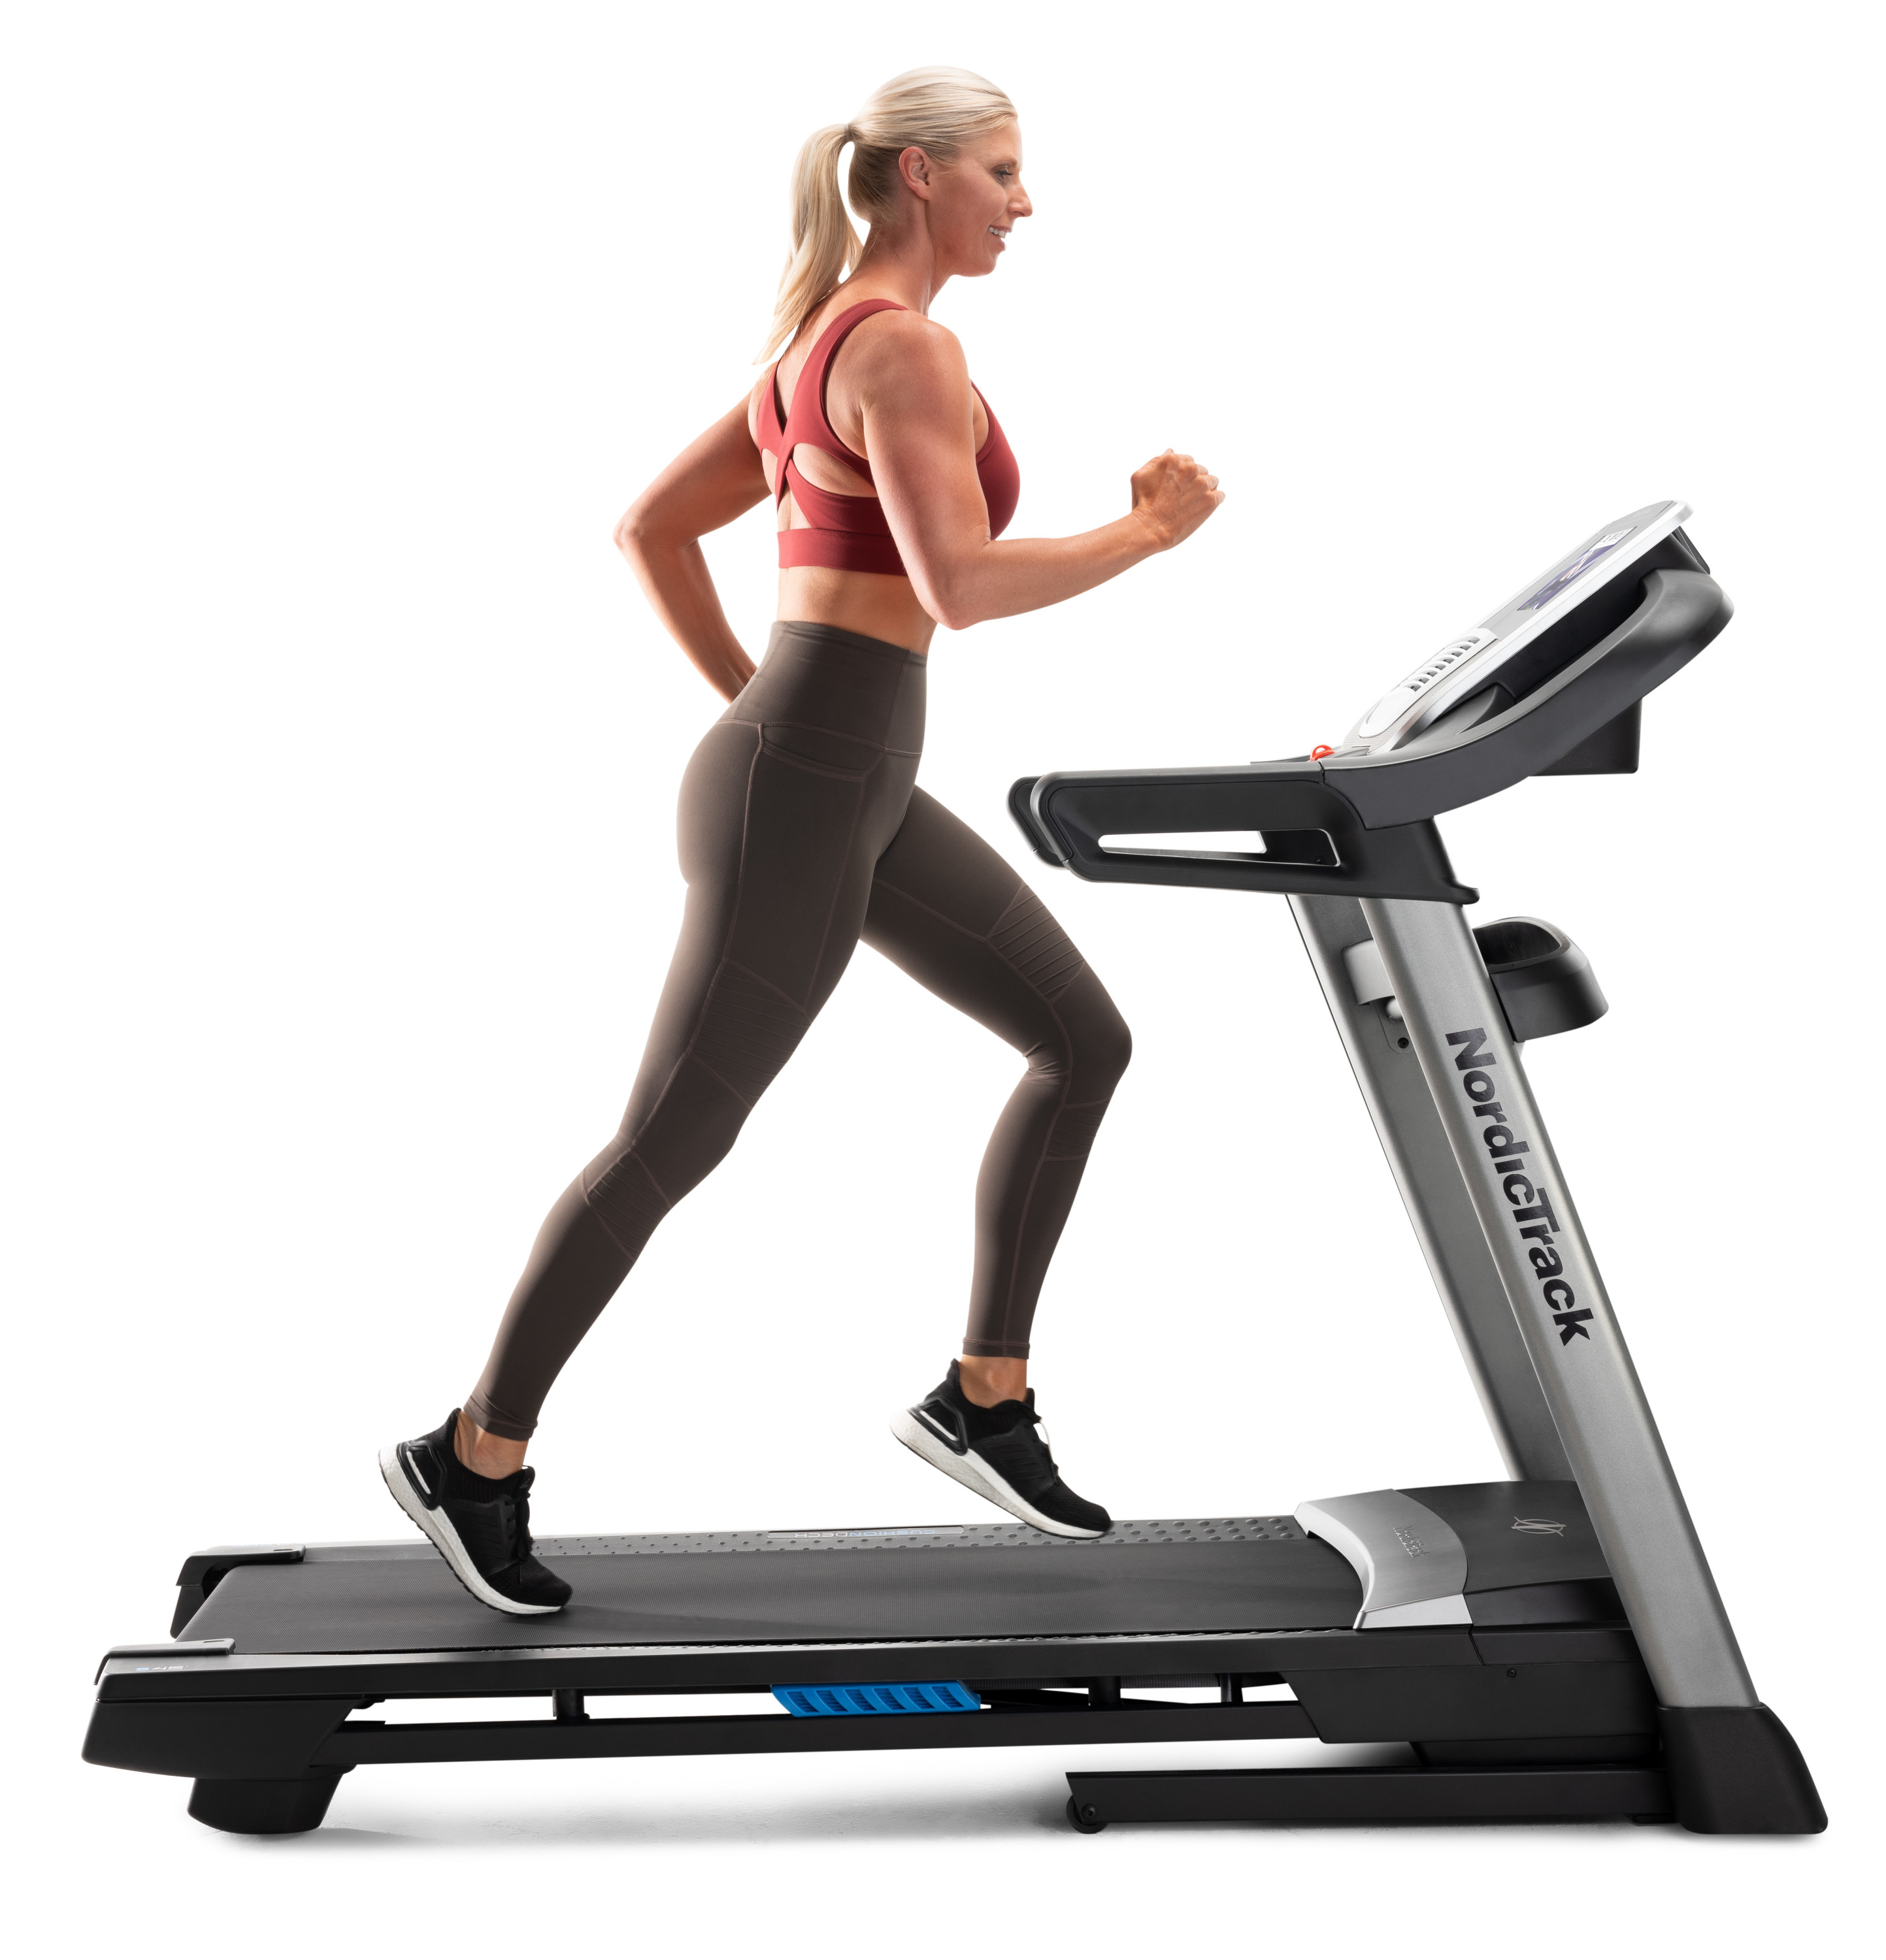 NordicTrack C 1100i Smart Treadmill with 10” Touchscreen and and 30-Day iFIT Family Membership - image 5 of 6